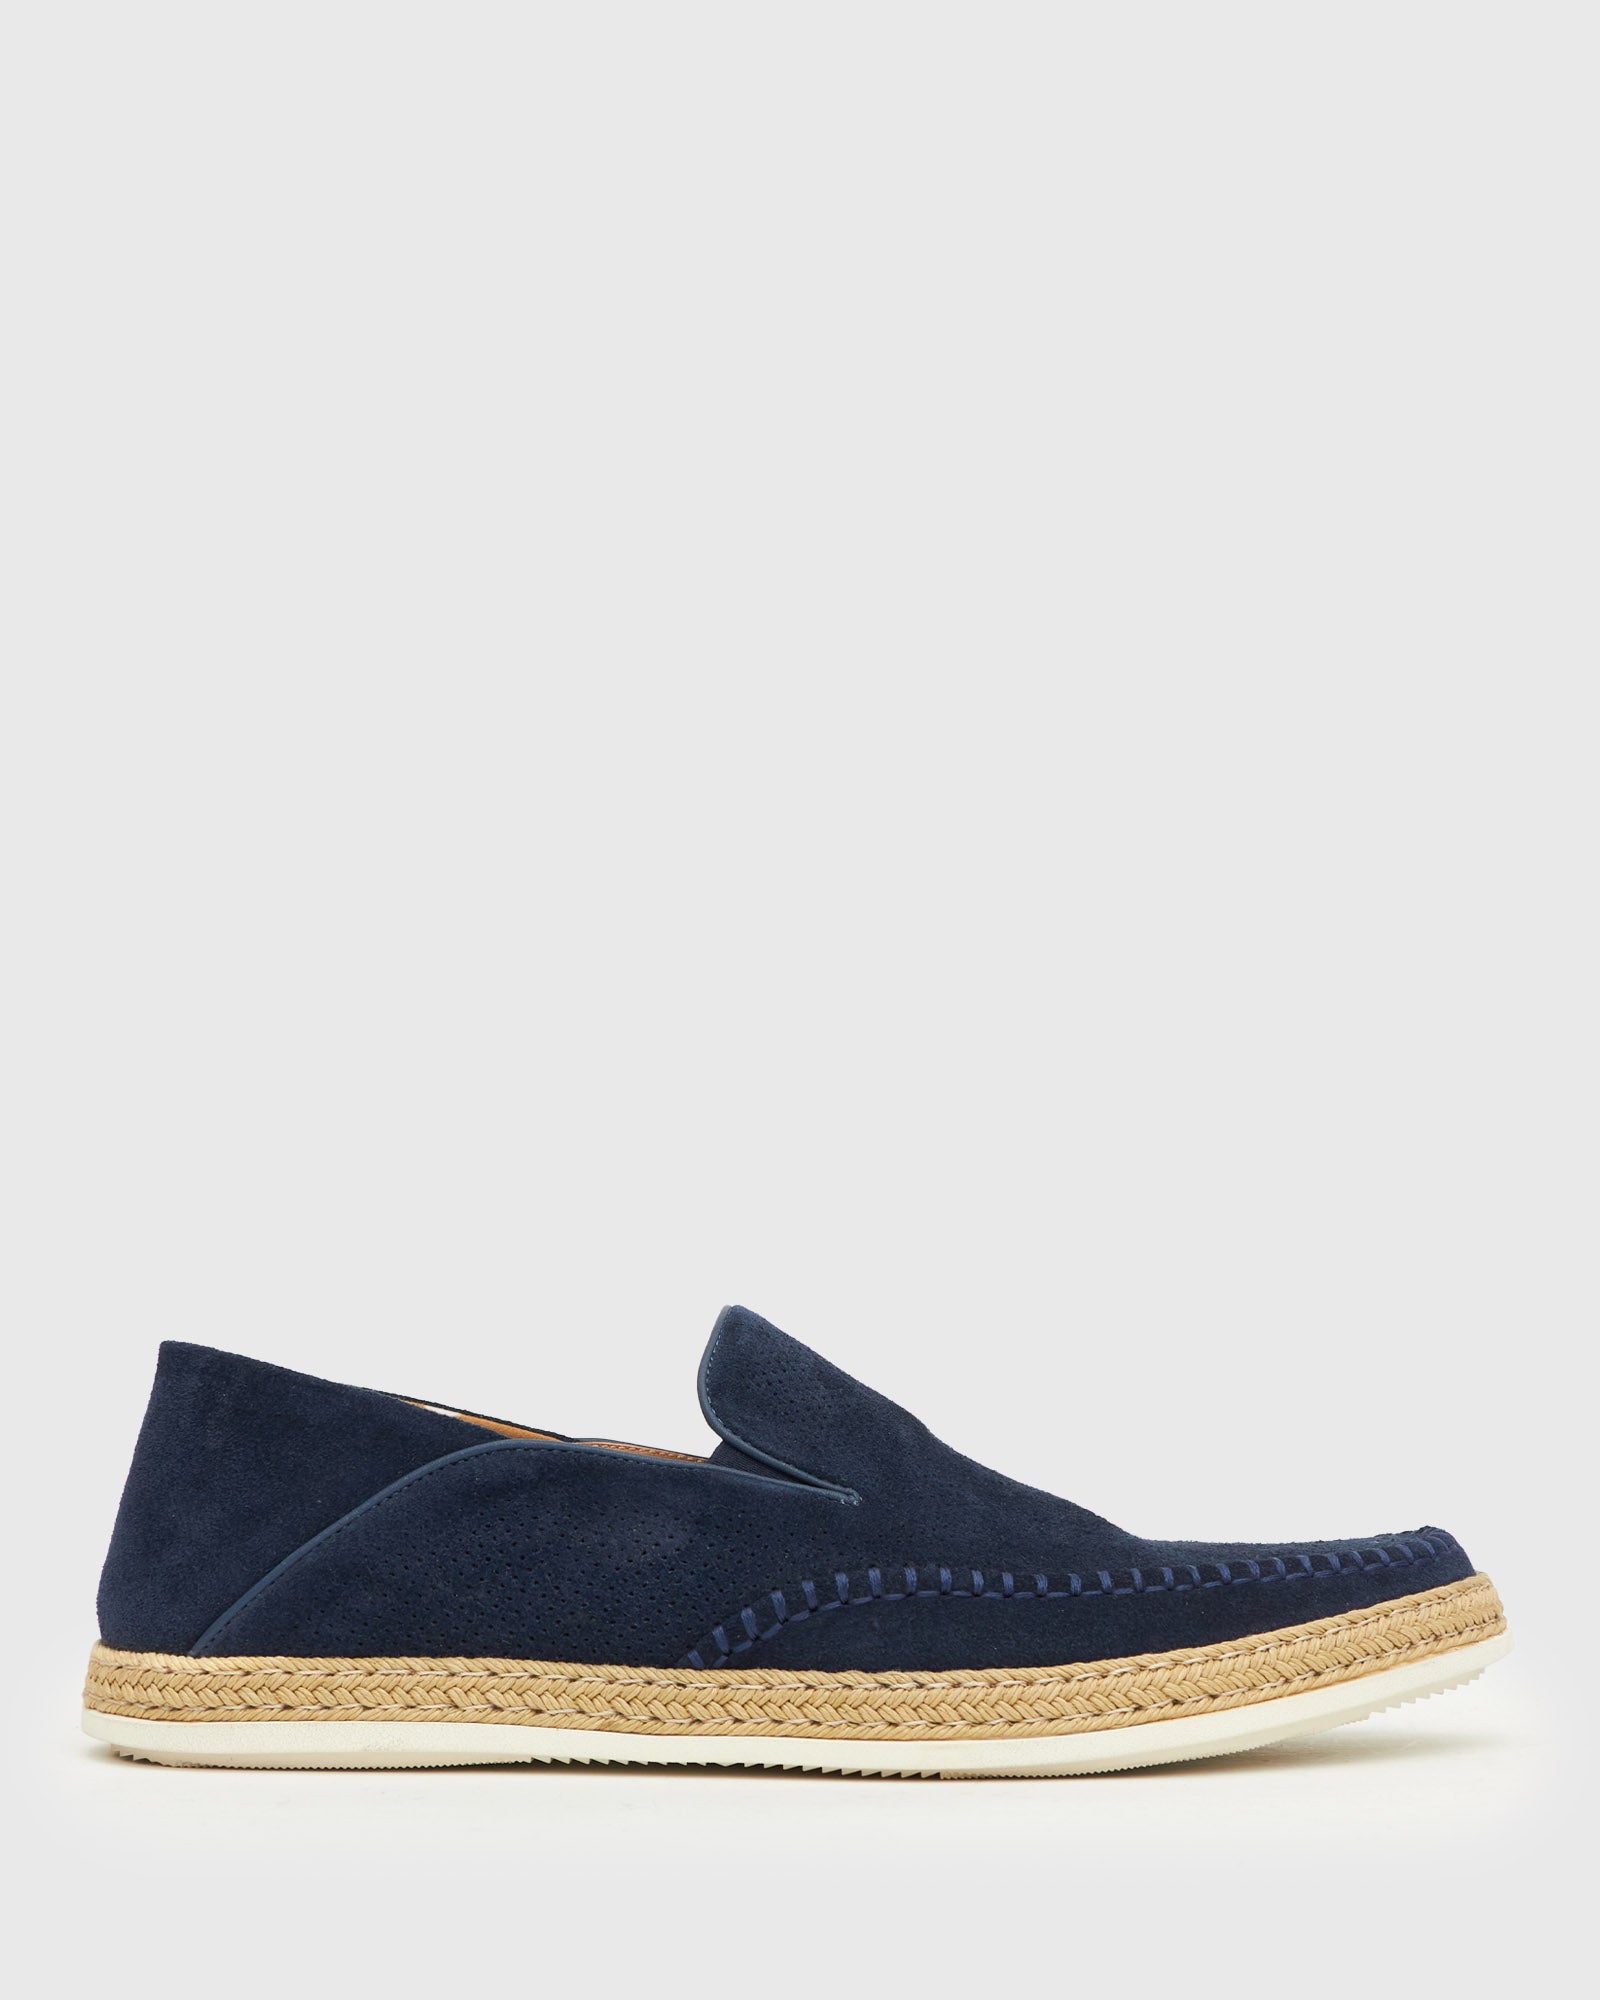 Buy LESTER Suede Leather Casual Shoes by Dakota online - Betts